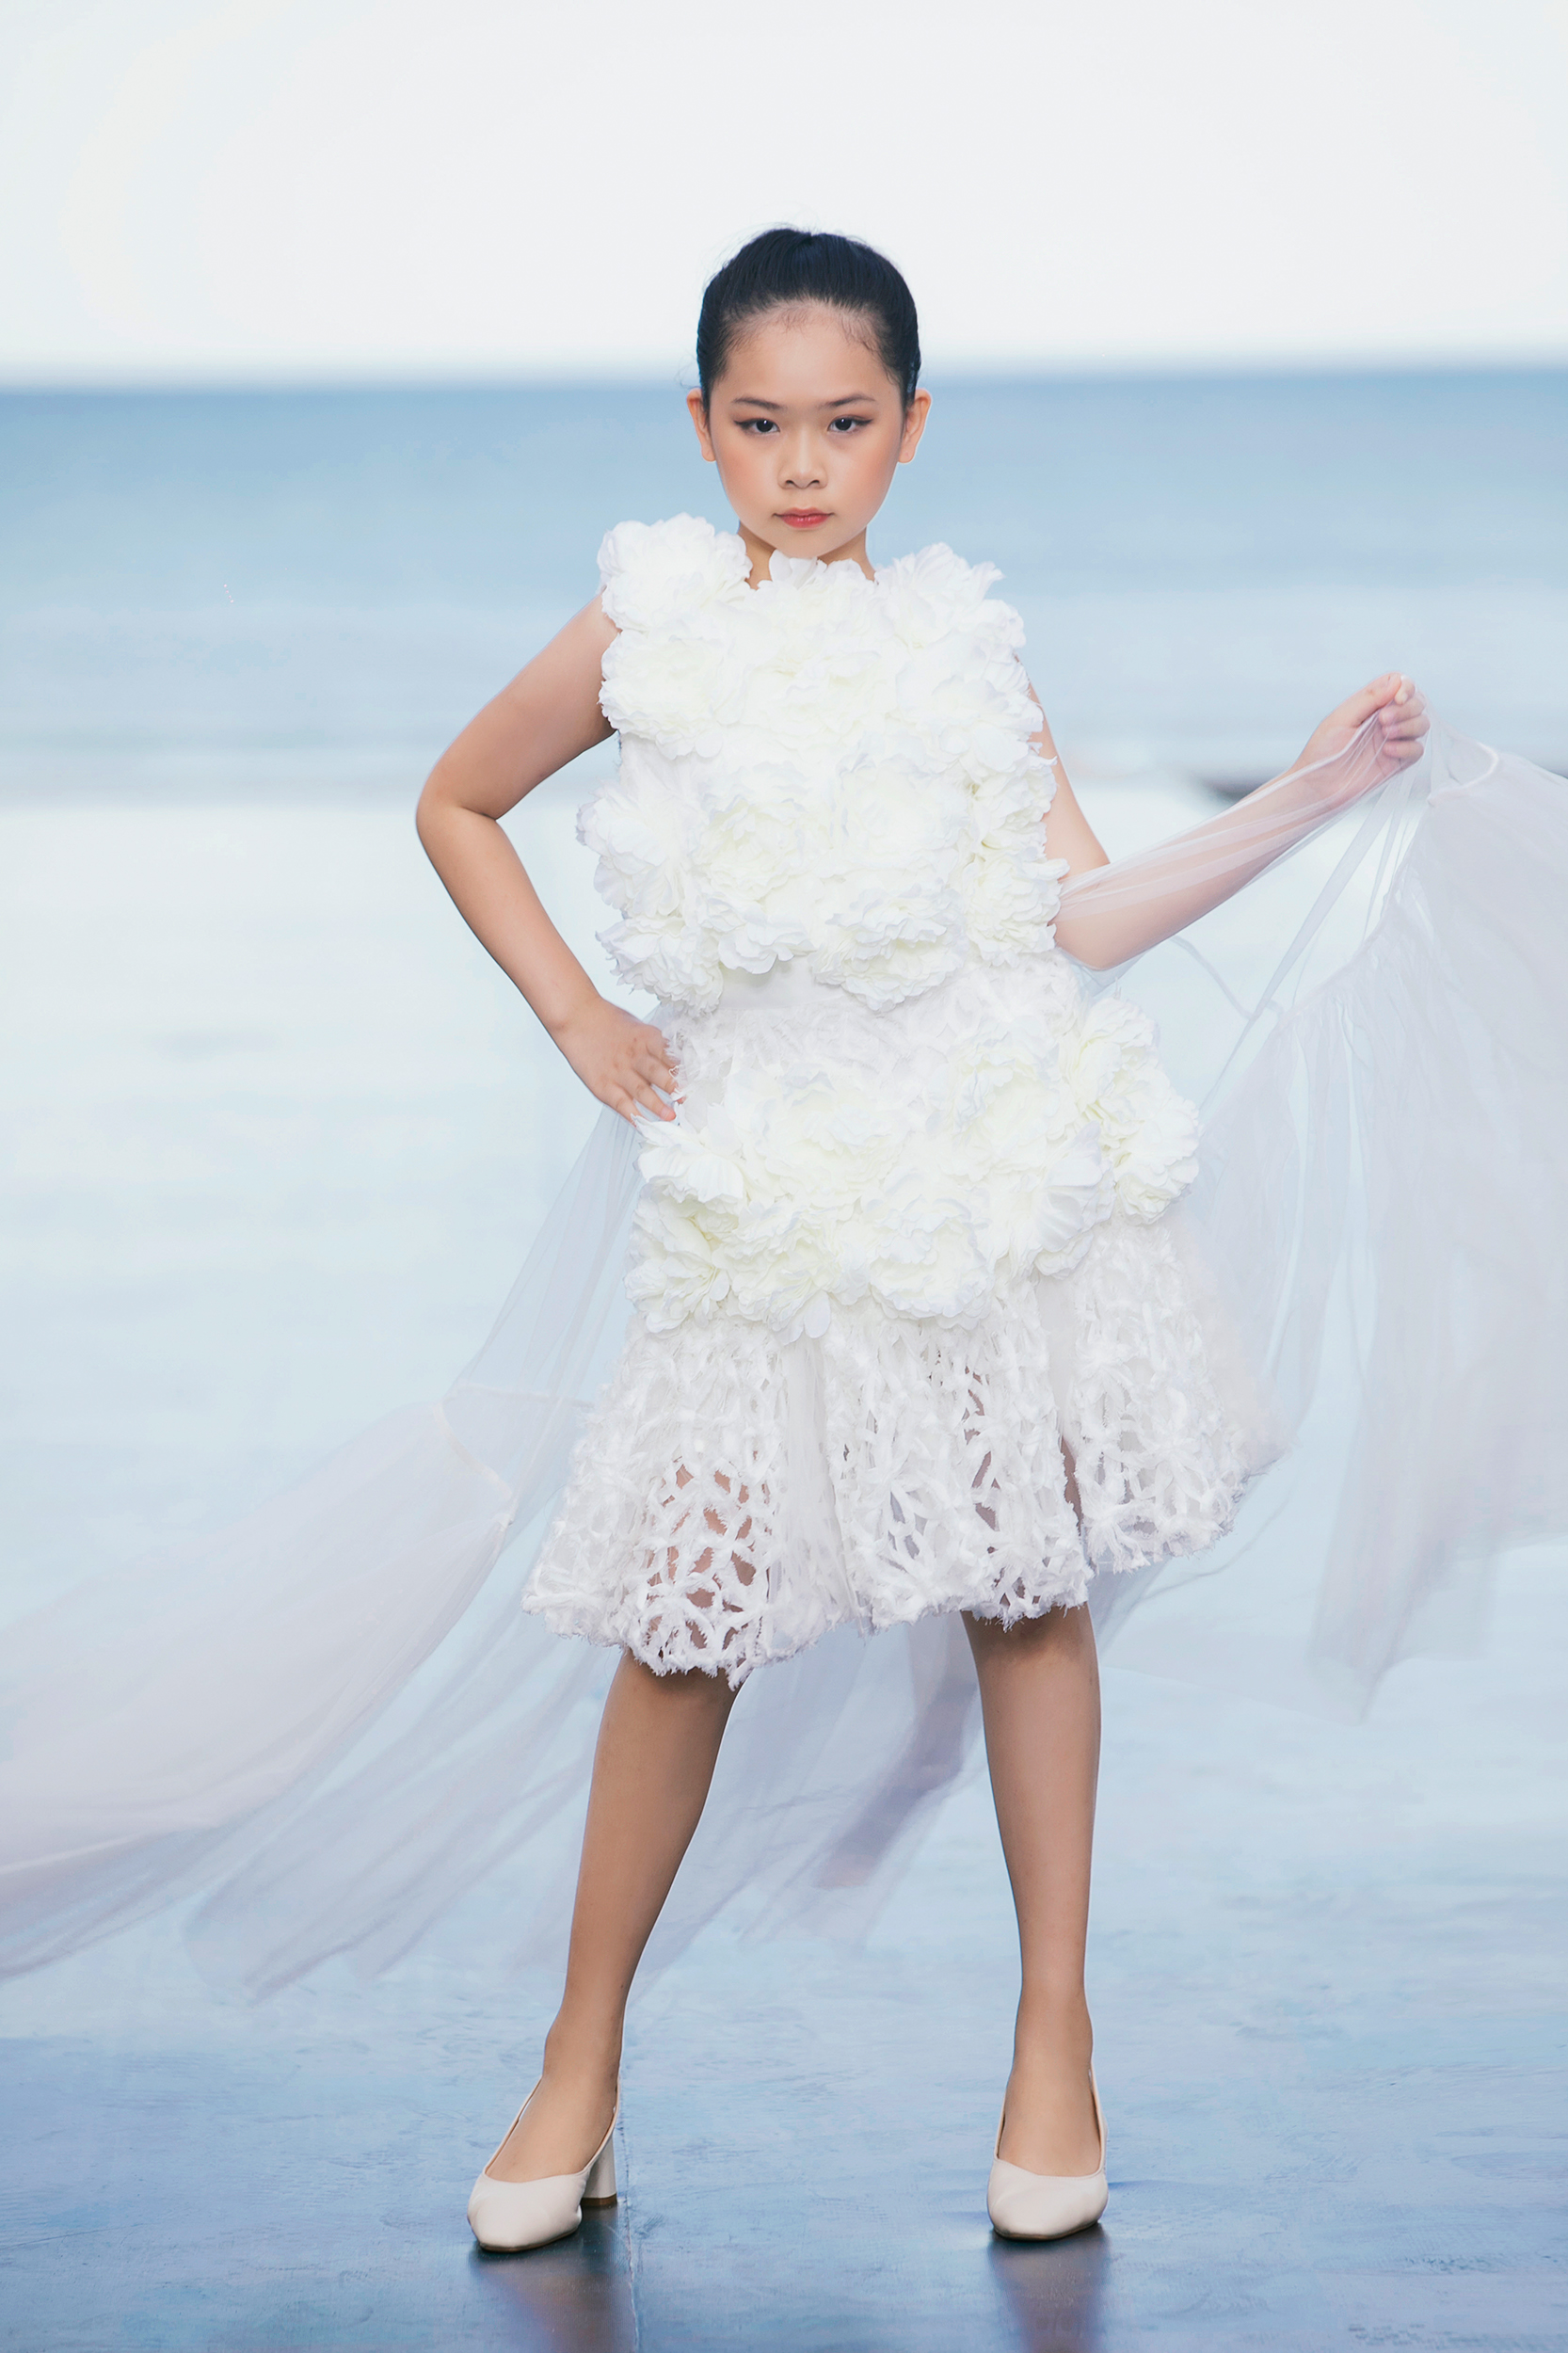 model kid thuan anh vedette cho ntk truong thanh long3